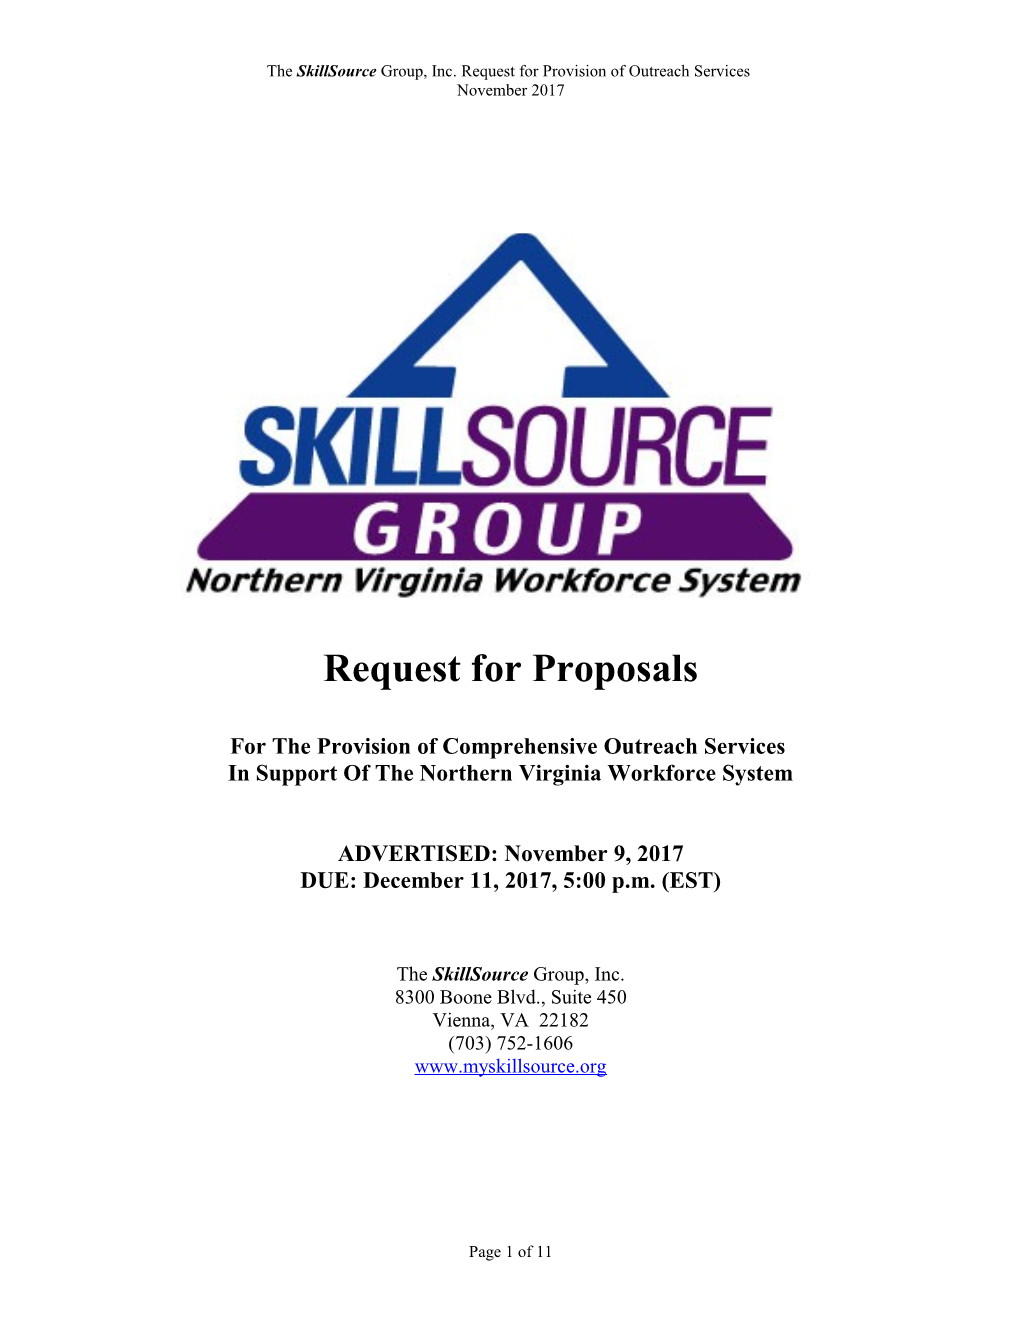 The Skillsource Group, Inc. Request for Provision Ofoutreach Services